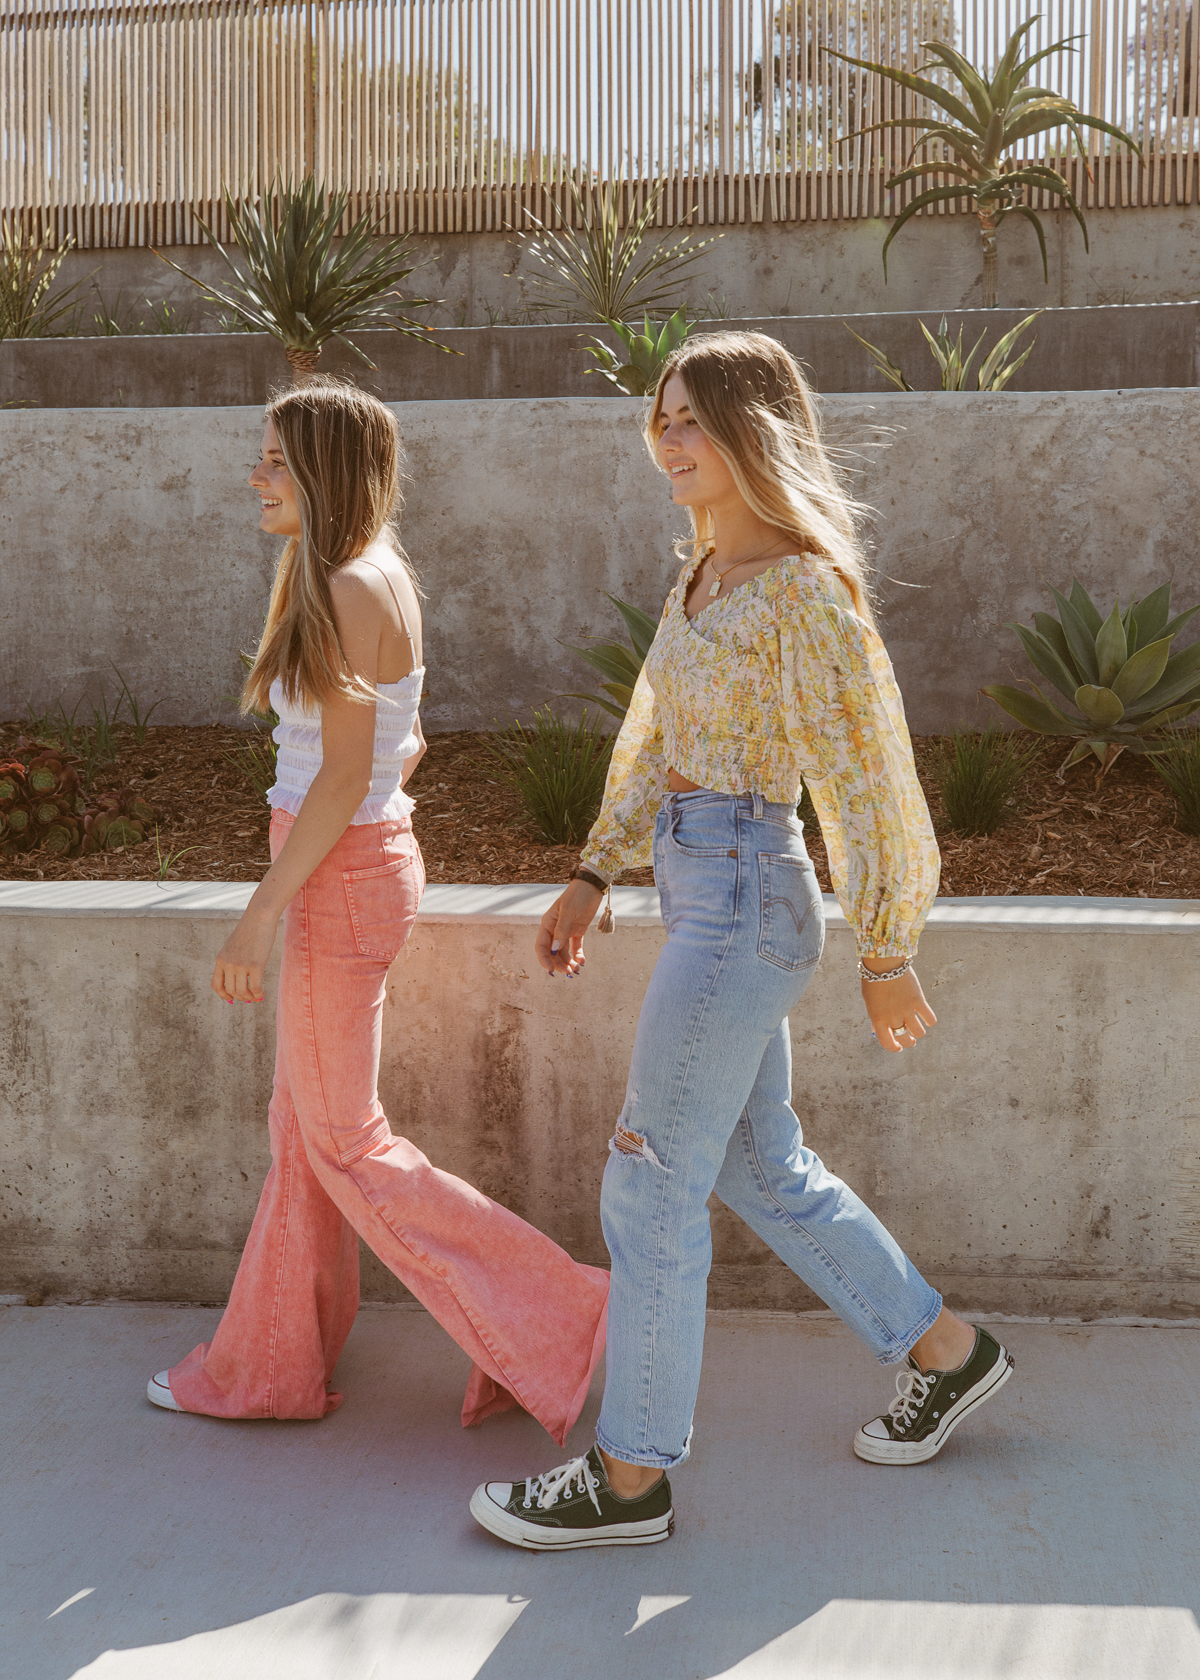 Summer Teen Style With Free People